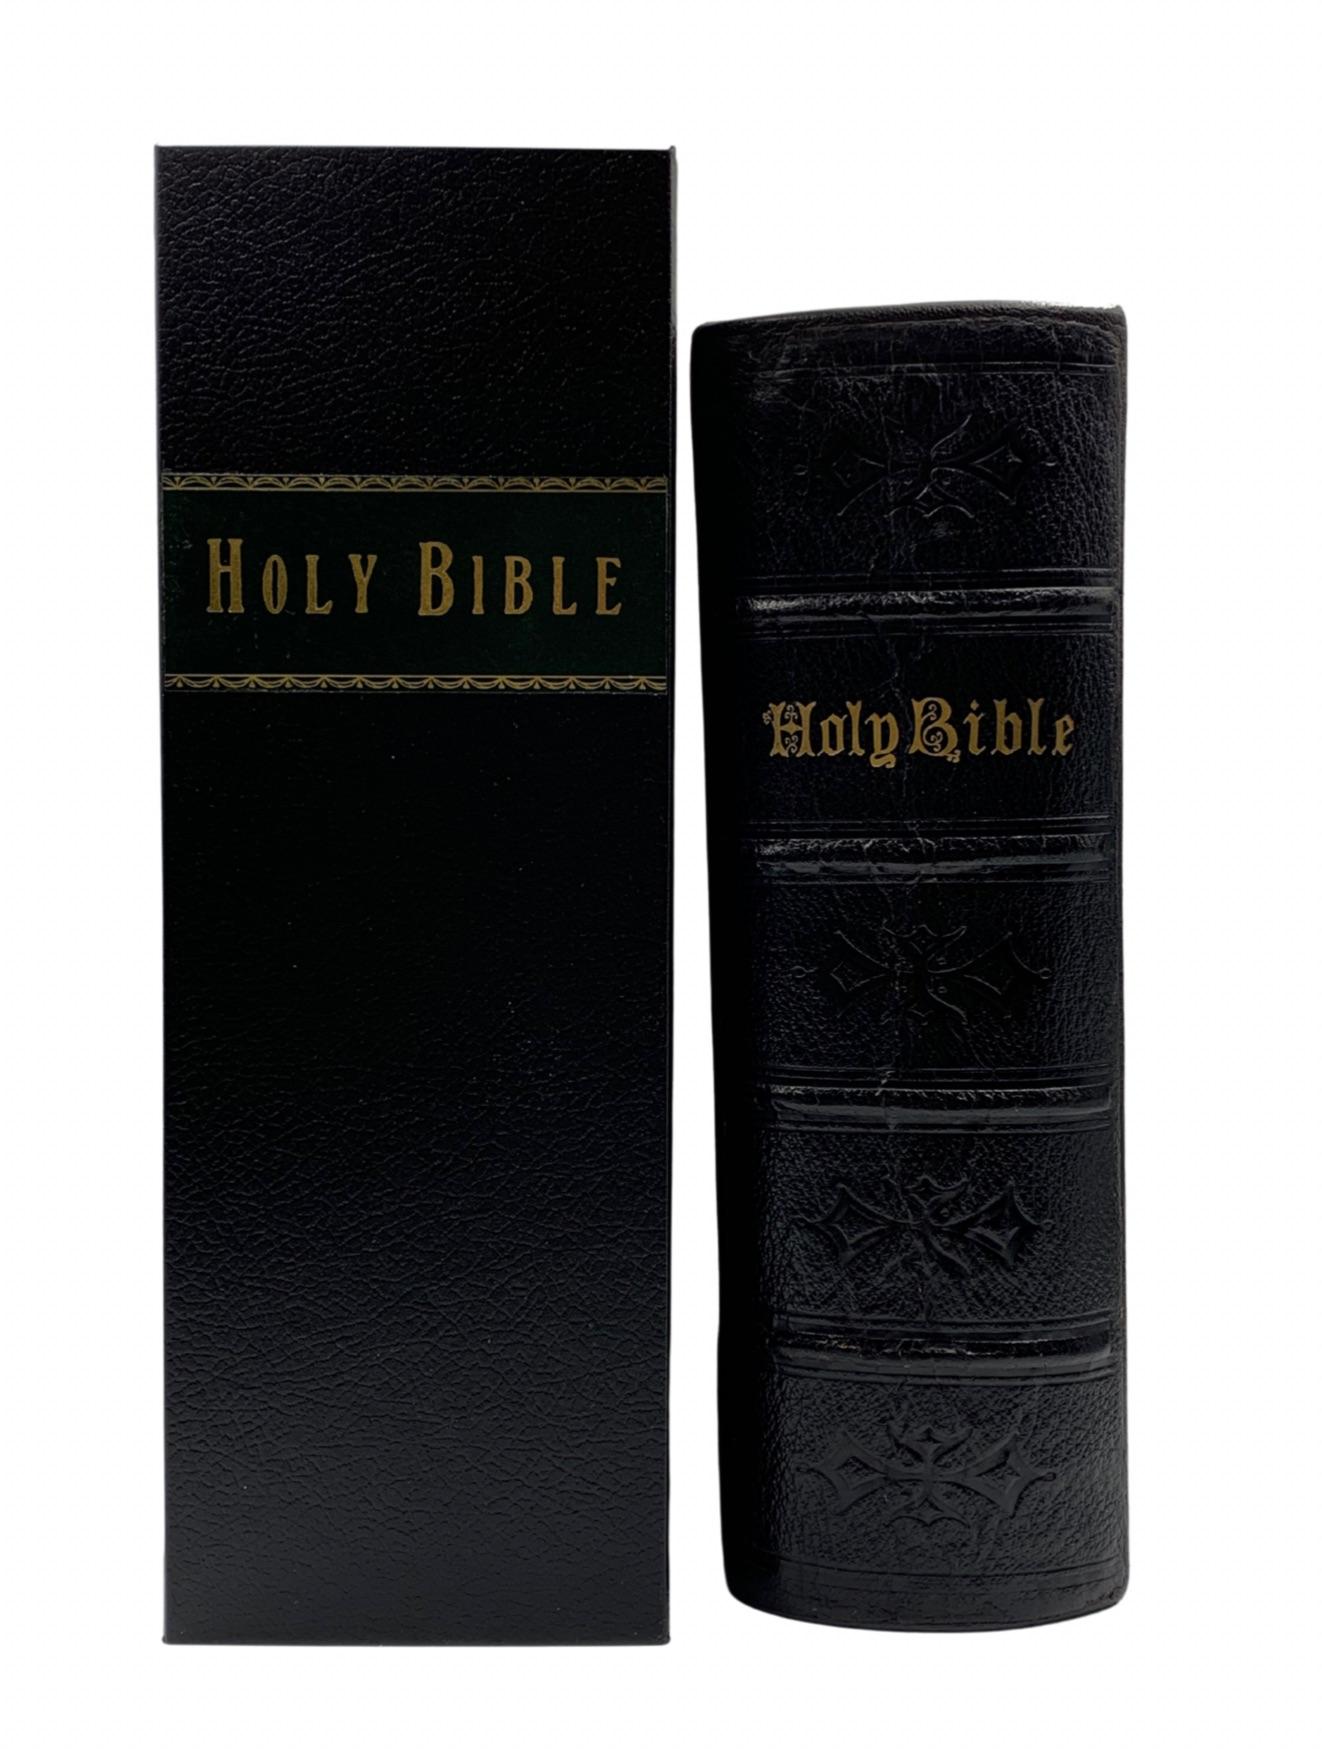 The National Comprehensive Family Bible. The Holy Bible with an Abridgement of the Commentaries of Scott and Henry, and Containing also Many Thousand Critical and Explanatory Notes Selected from The Standard Authors of Europe and America. The